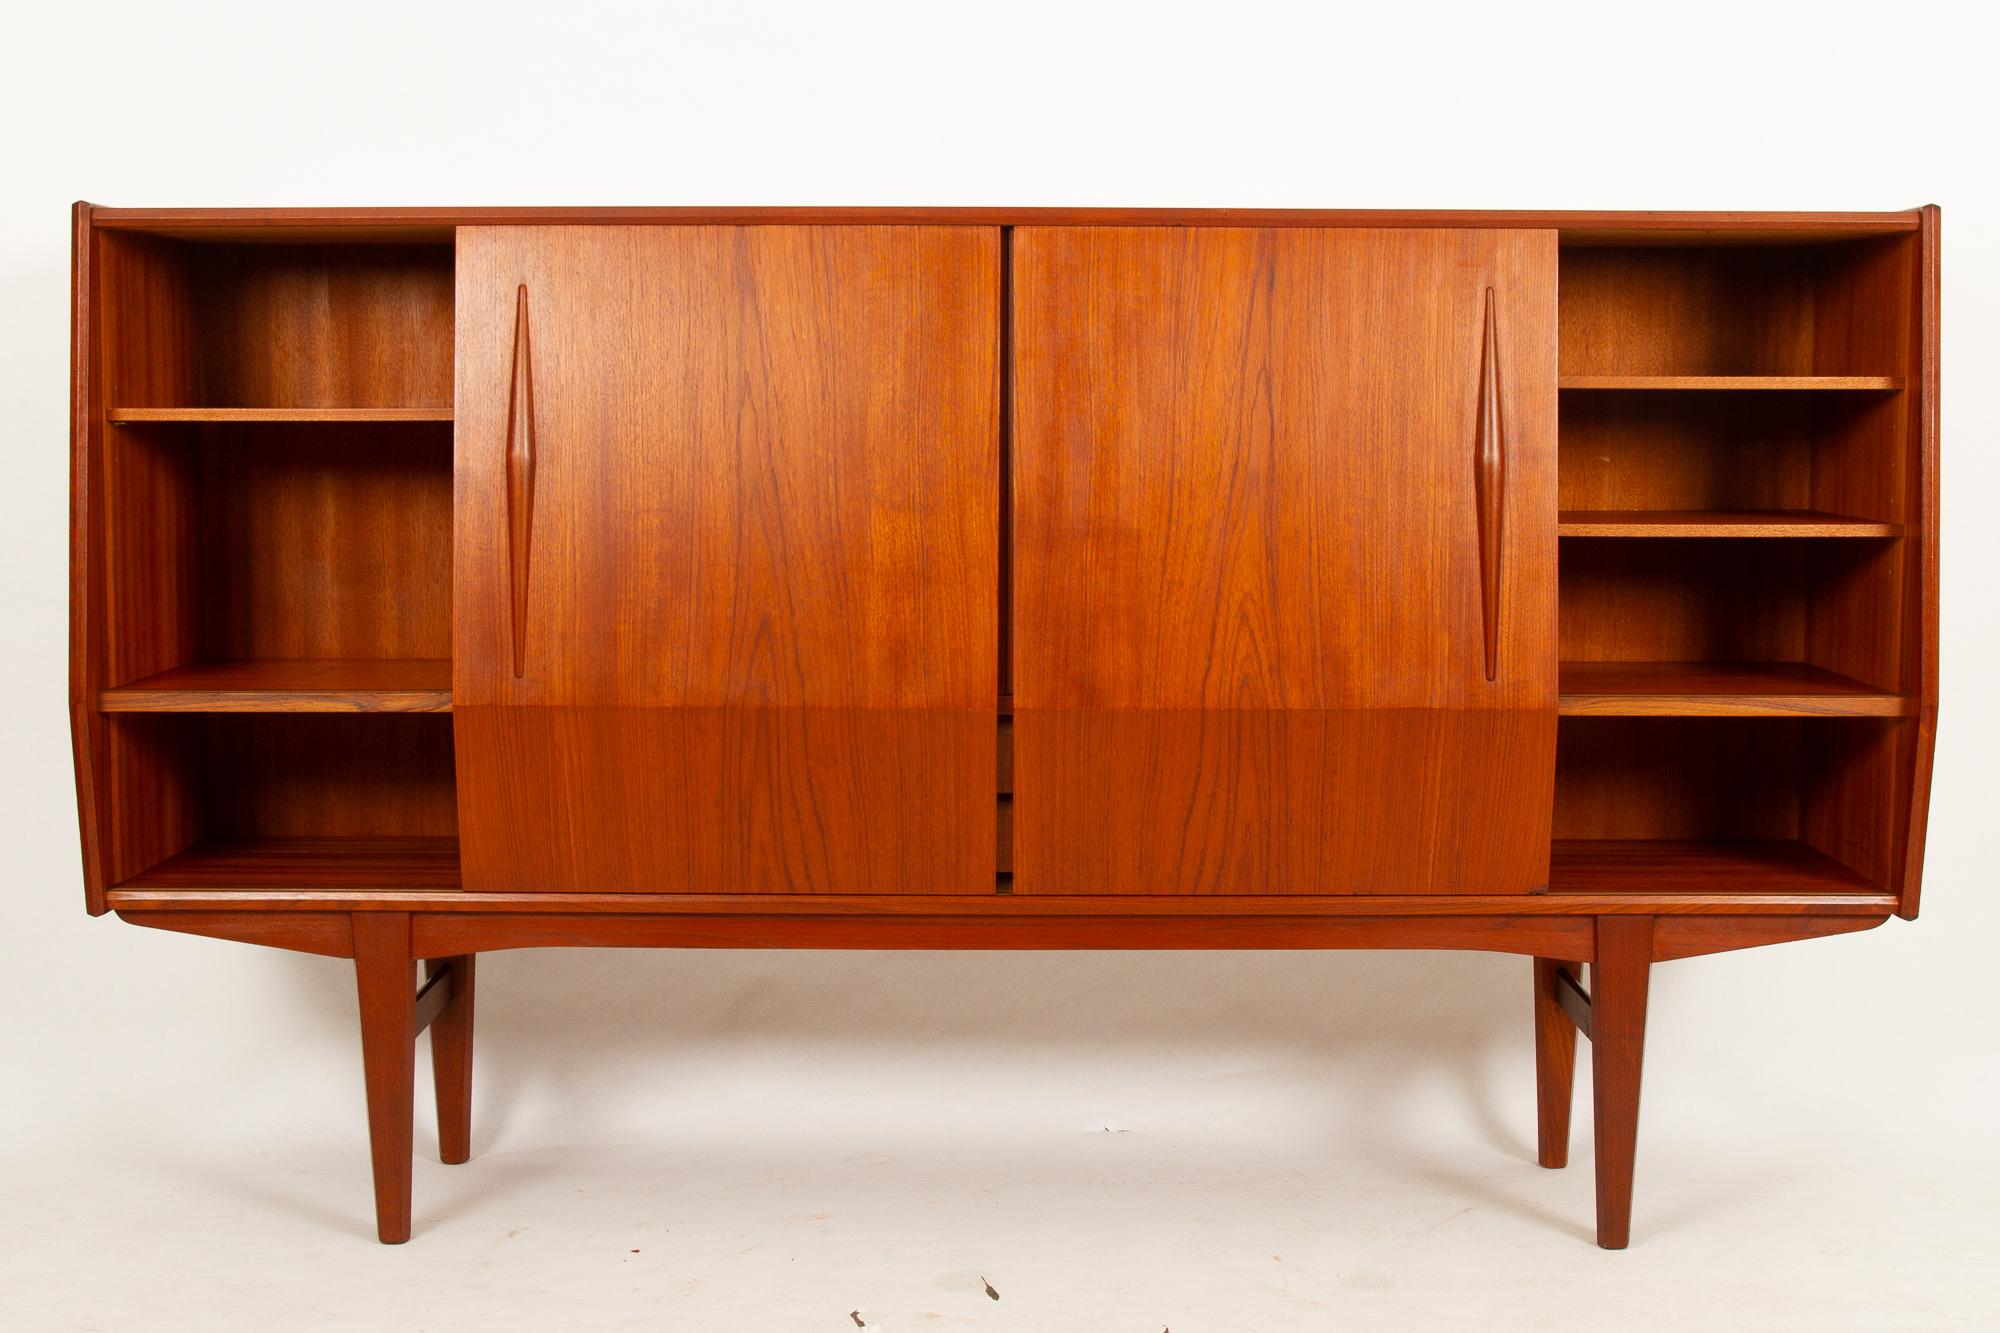 Danish teak sideboard 1960s.
Tall credenza with mirrored bar unit, shelves and drawers. Many beautiful details and loads of storage space. The bar unit features decorated mirror and curved shelves on brass pillars. Four small drawers with green